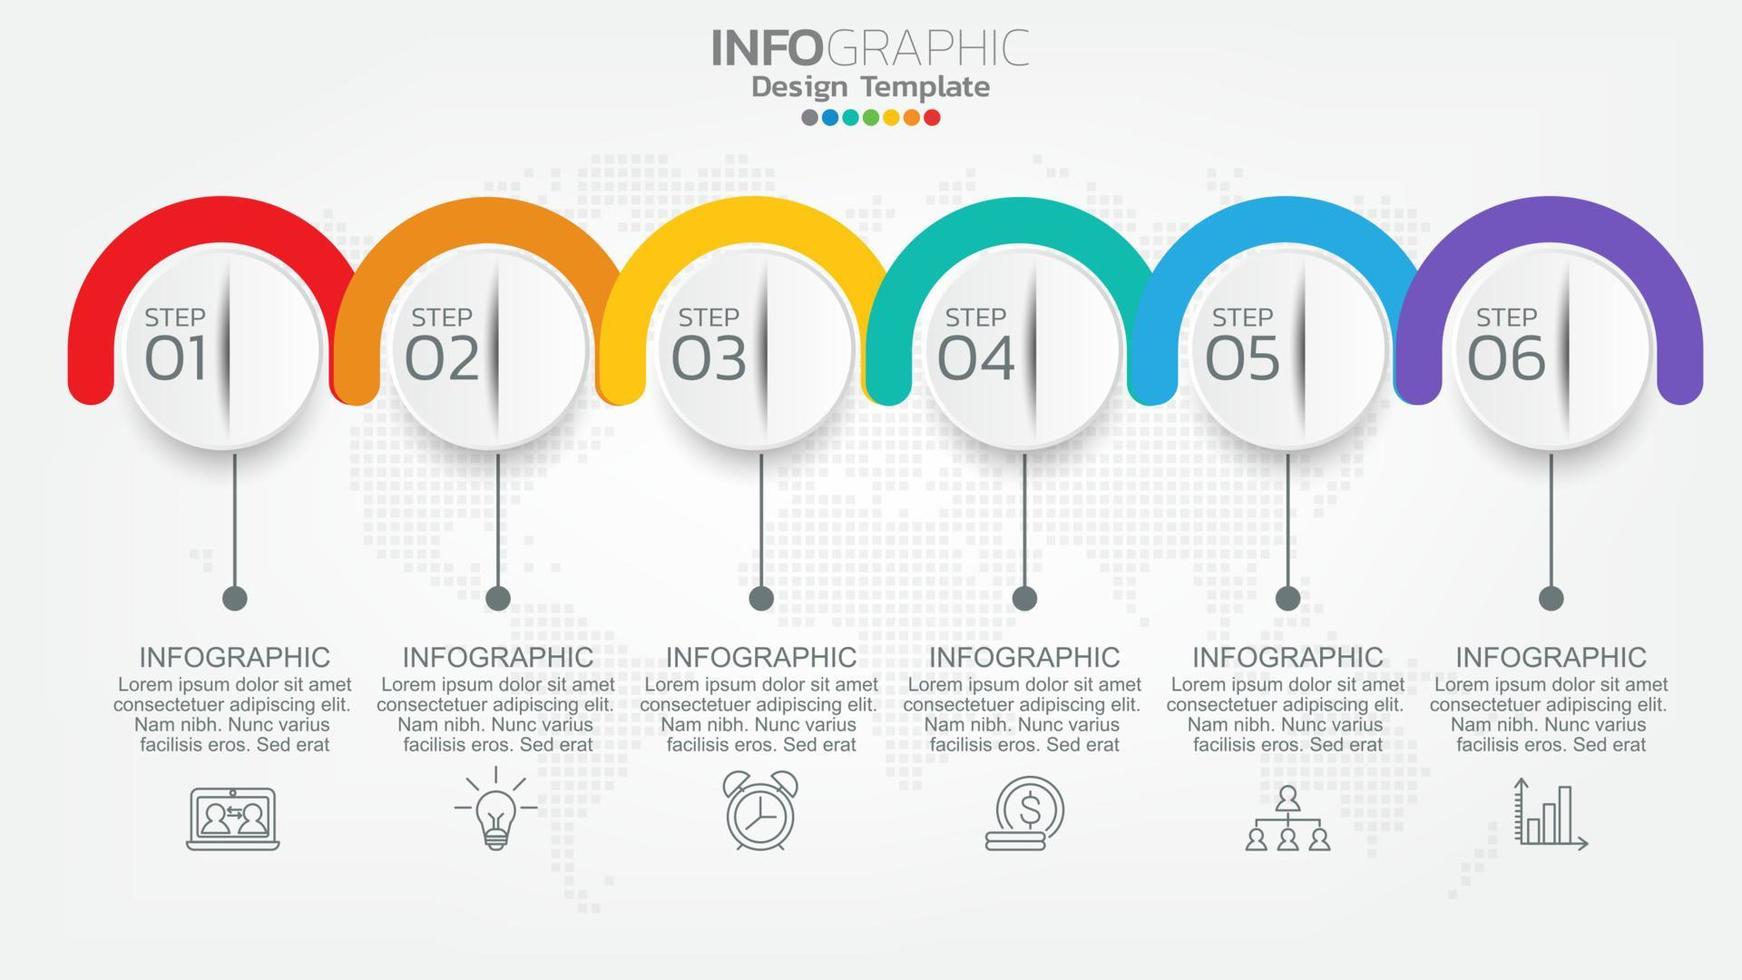 SEO search engine optimization banner web icon for business and marketing vector